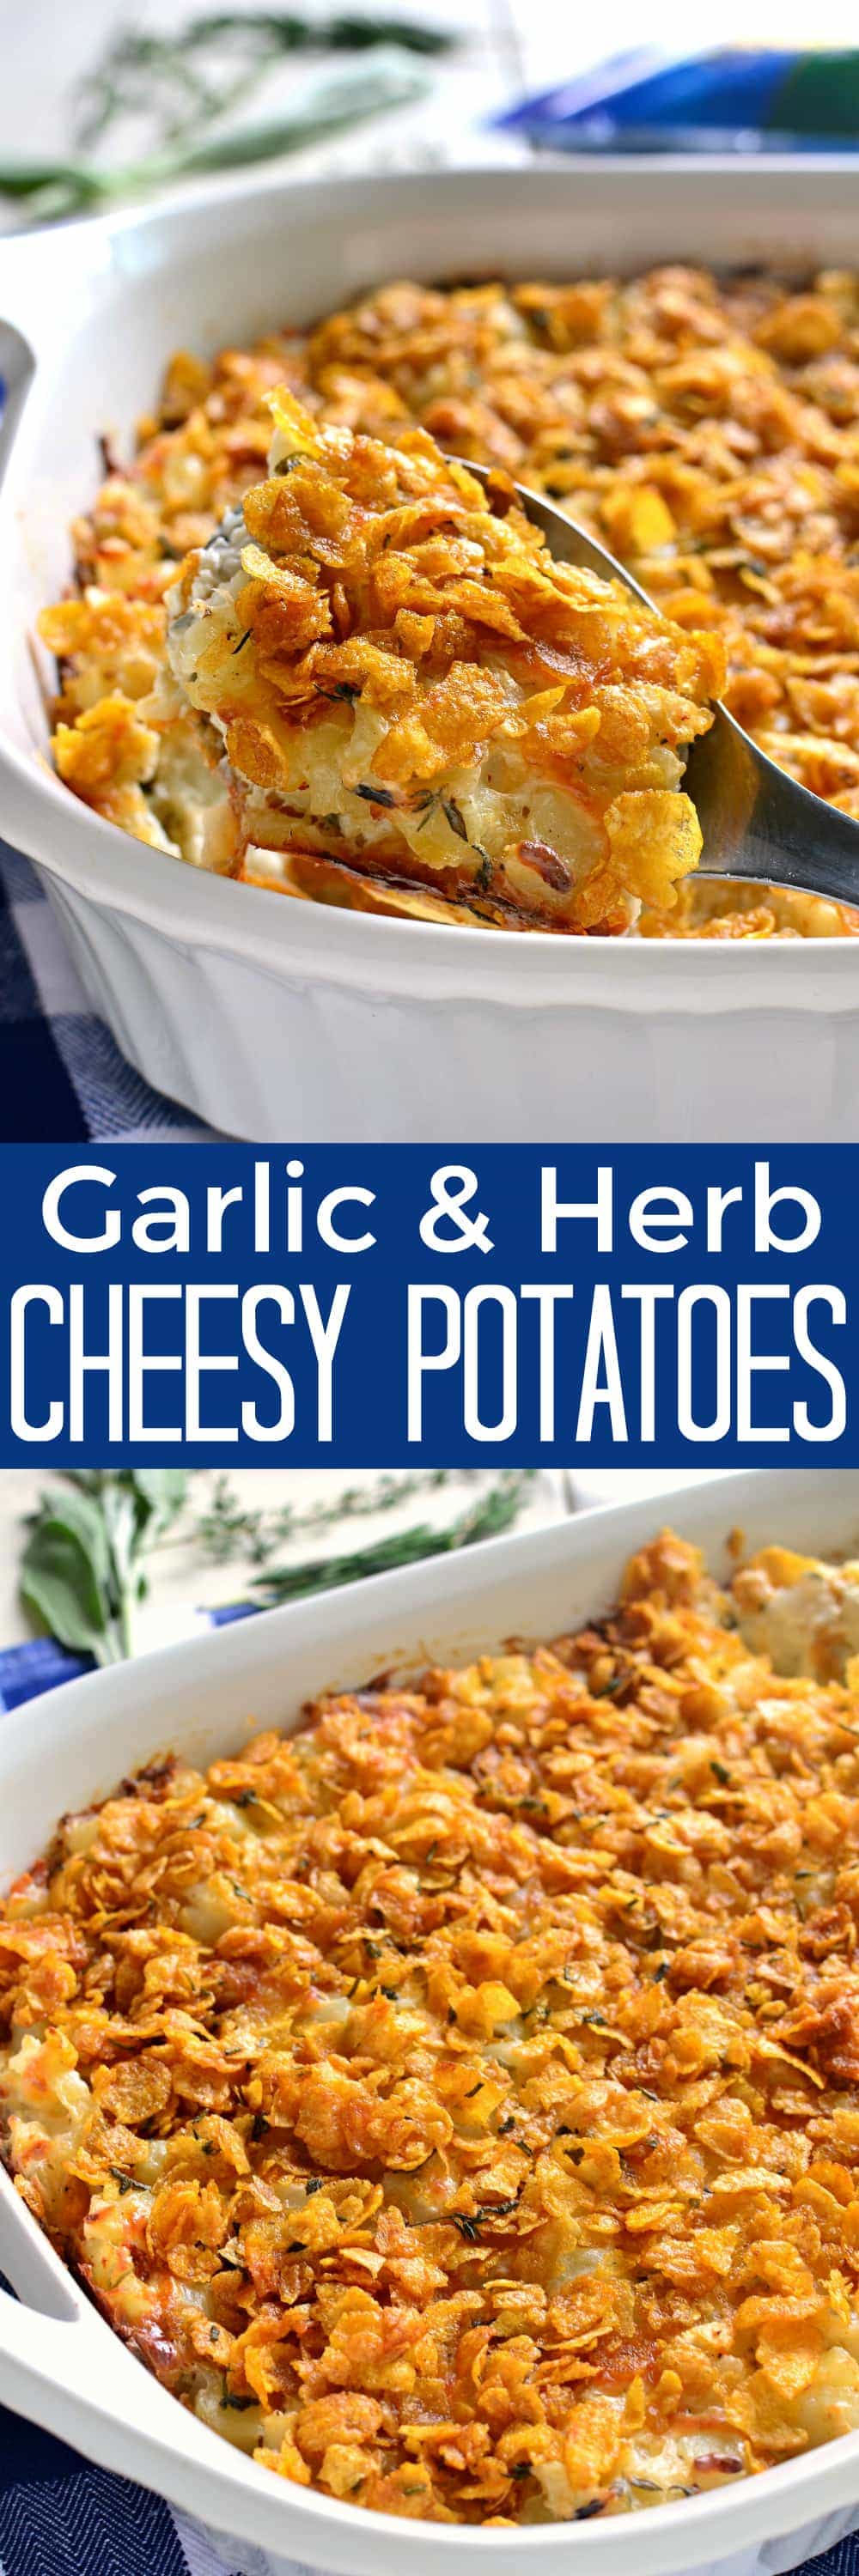 These Garlic & Herb Cheesy Potatoes are a delicious twist on a classic! Made with fresh herbs, minced garlic, and a blend of mozzarella and Parmesan cheese, these potatoes are guaranteed to become a new family favorite!